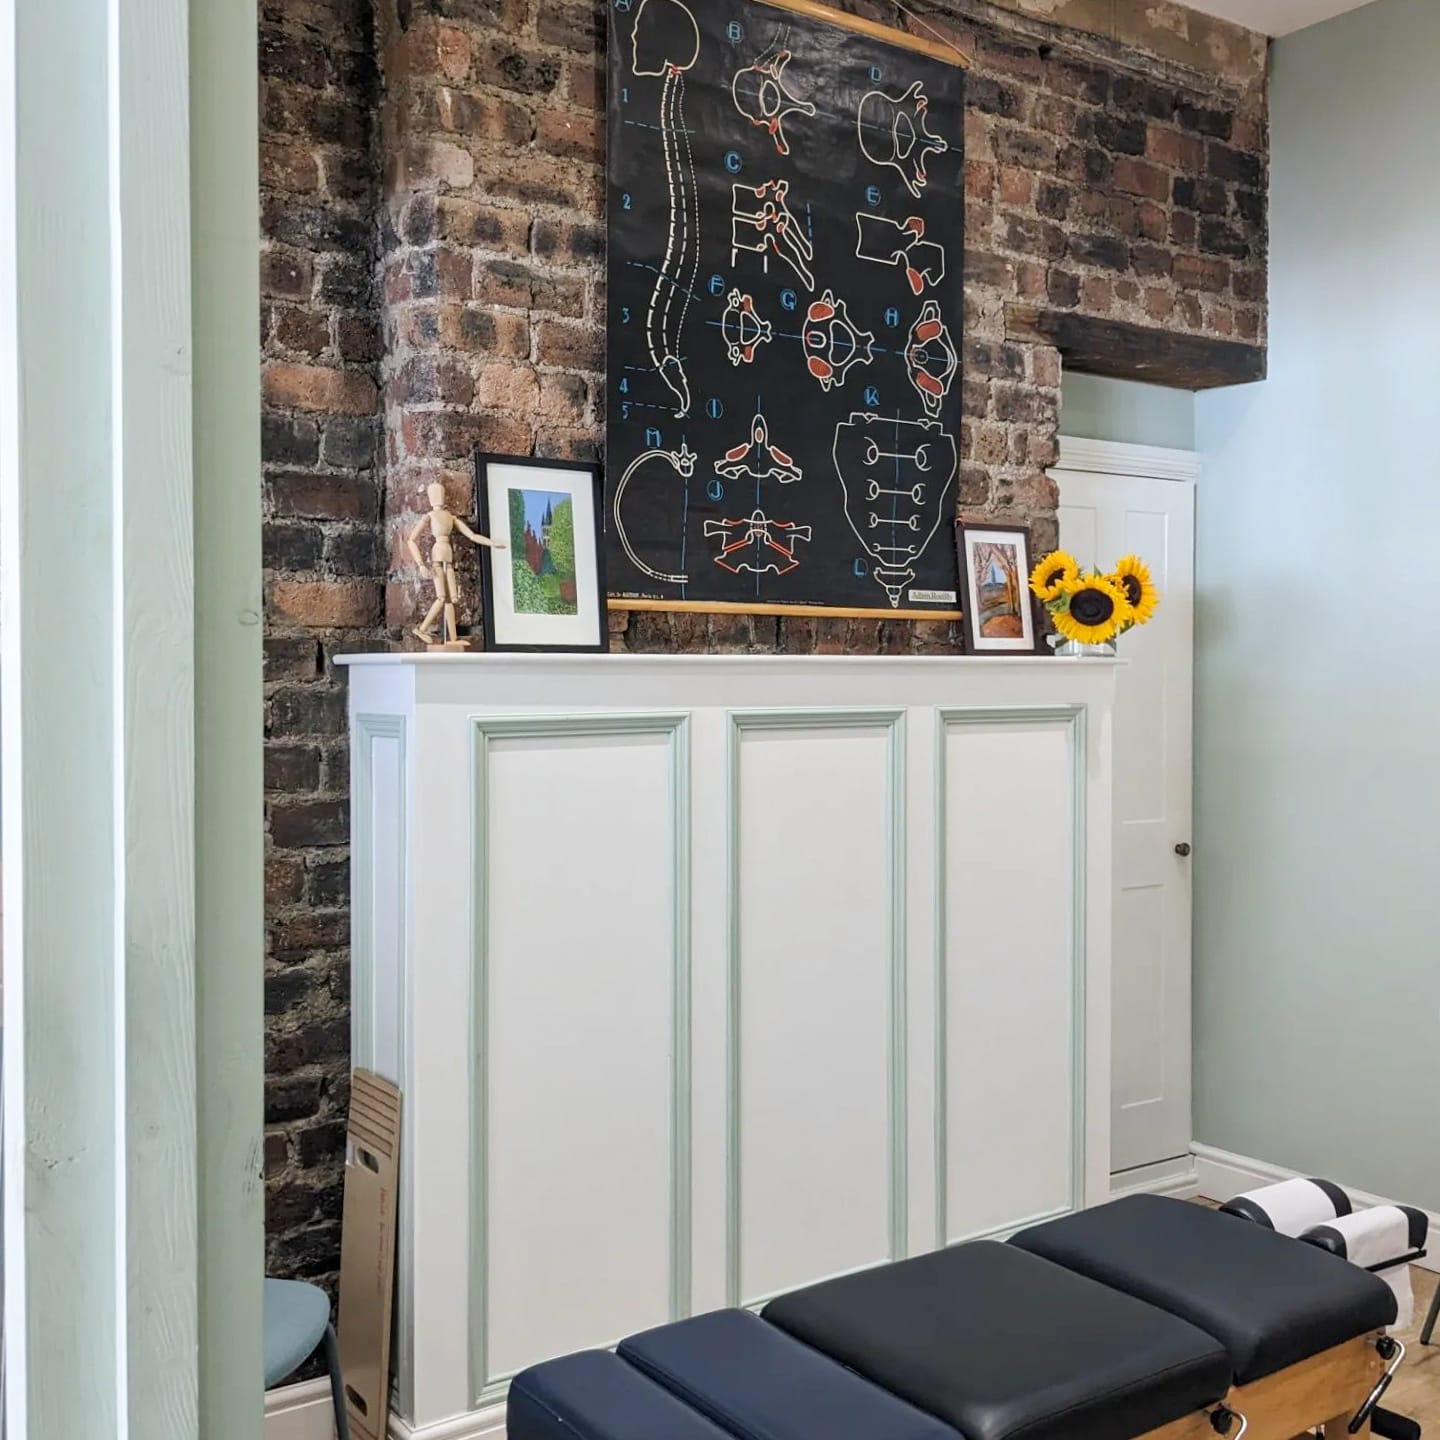 Start-up stories - West End Chiropractic